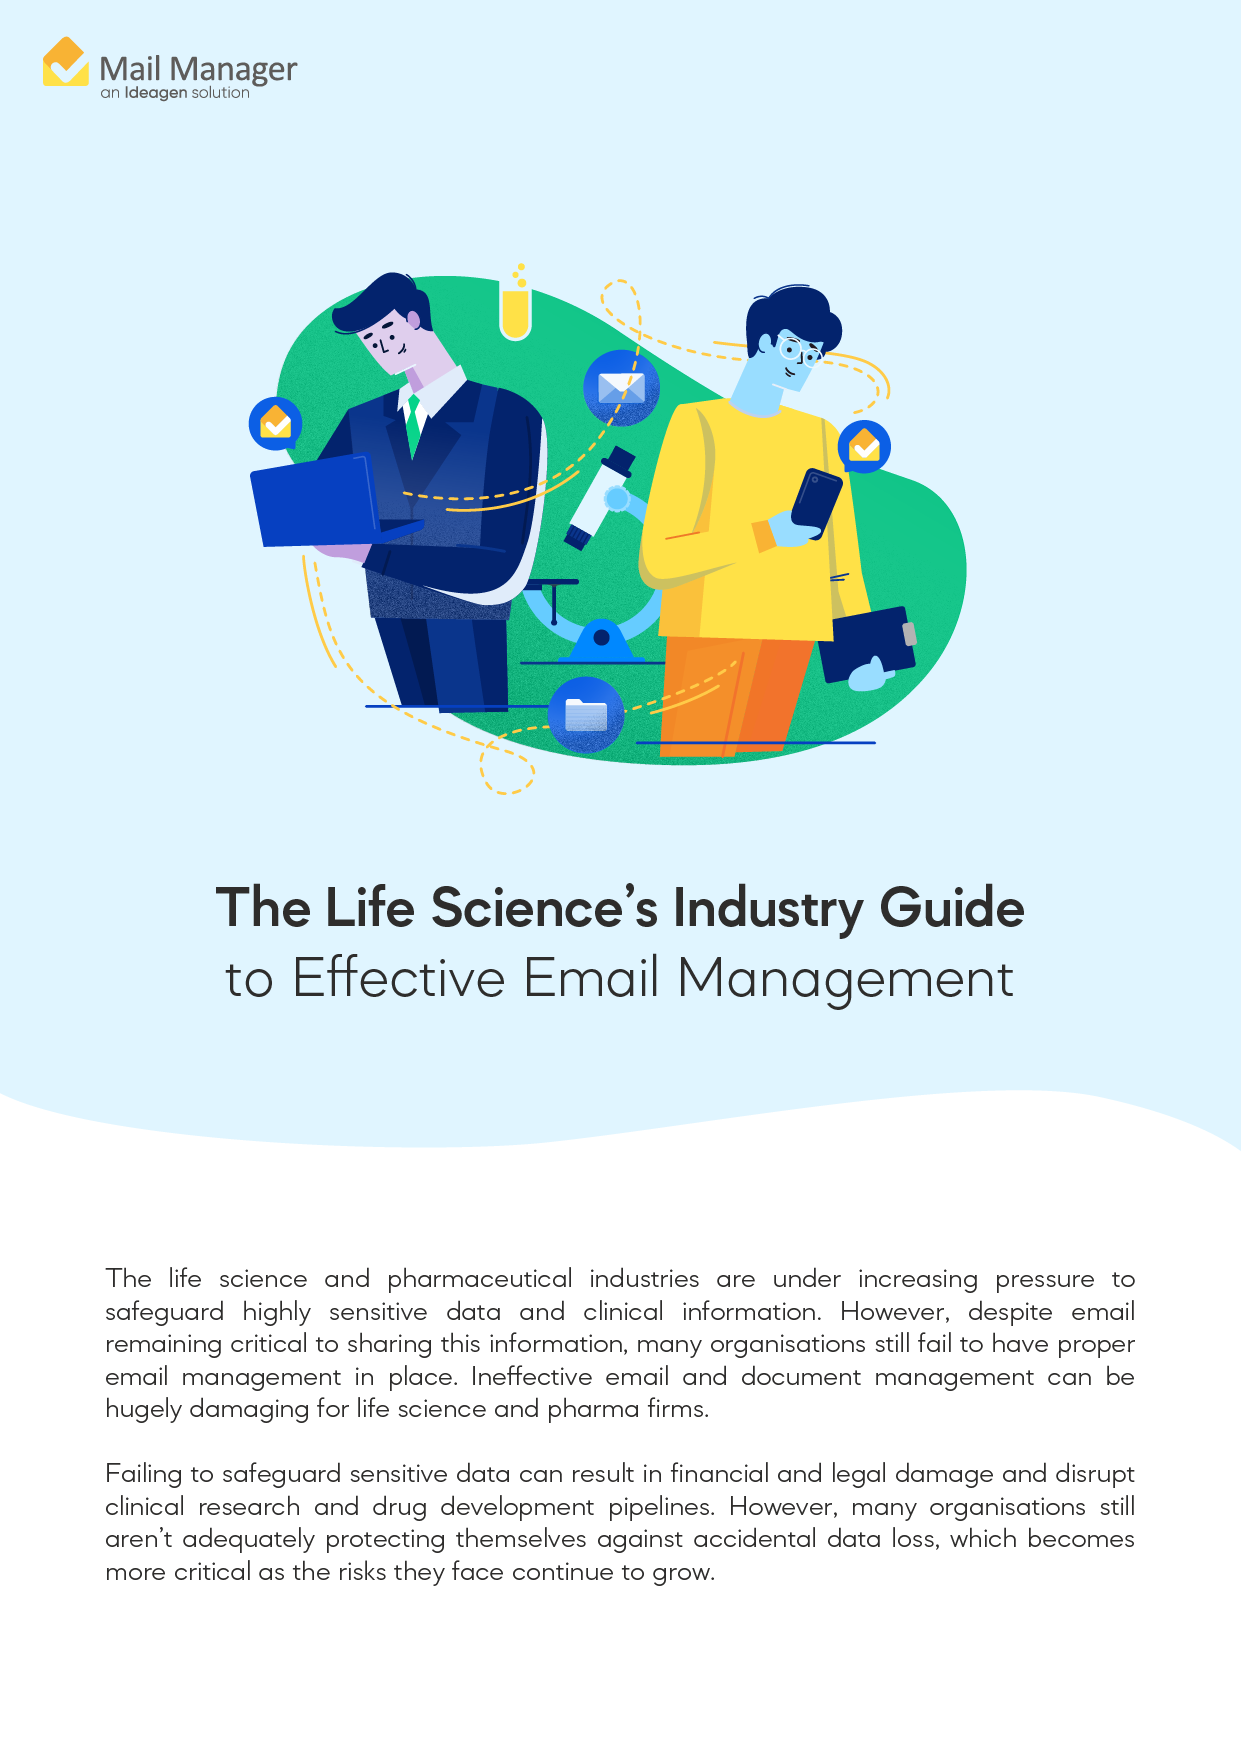 The Life Science’s Industry Guide to Effective Email Management-01